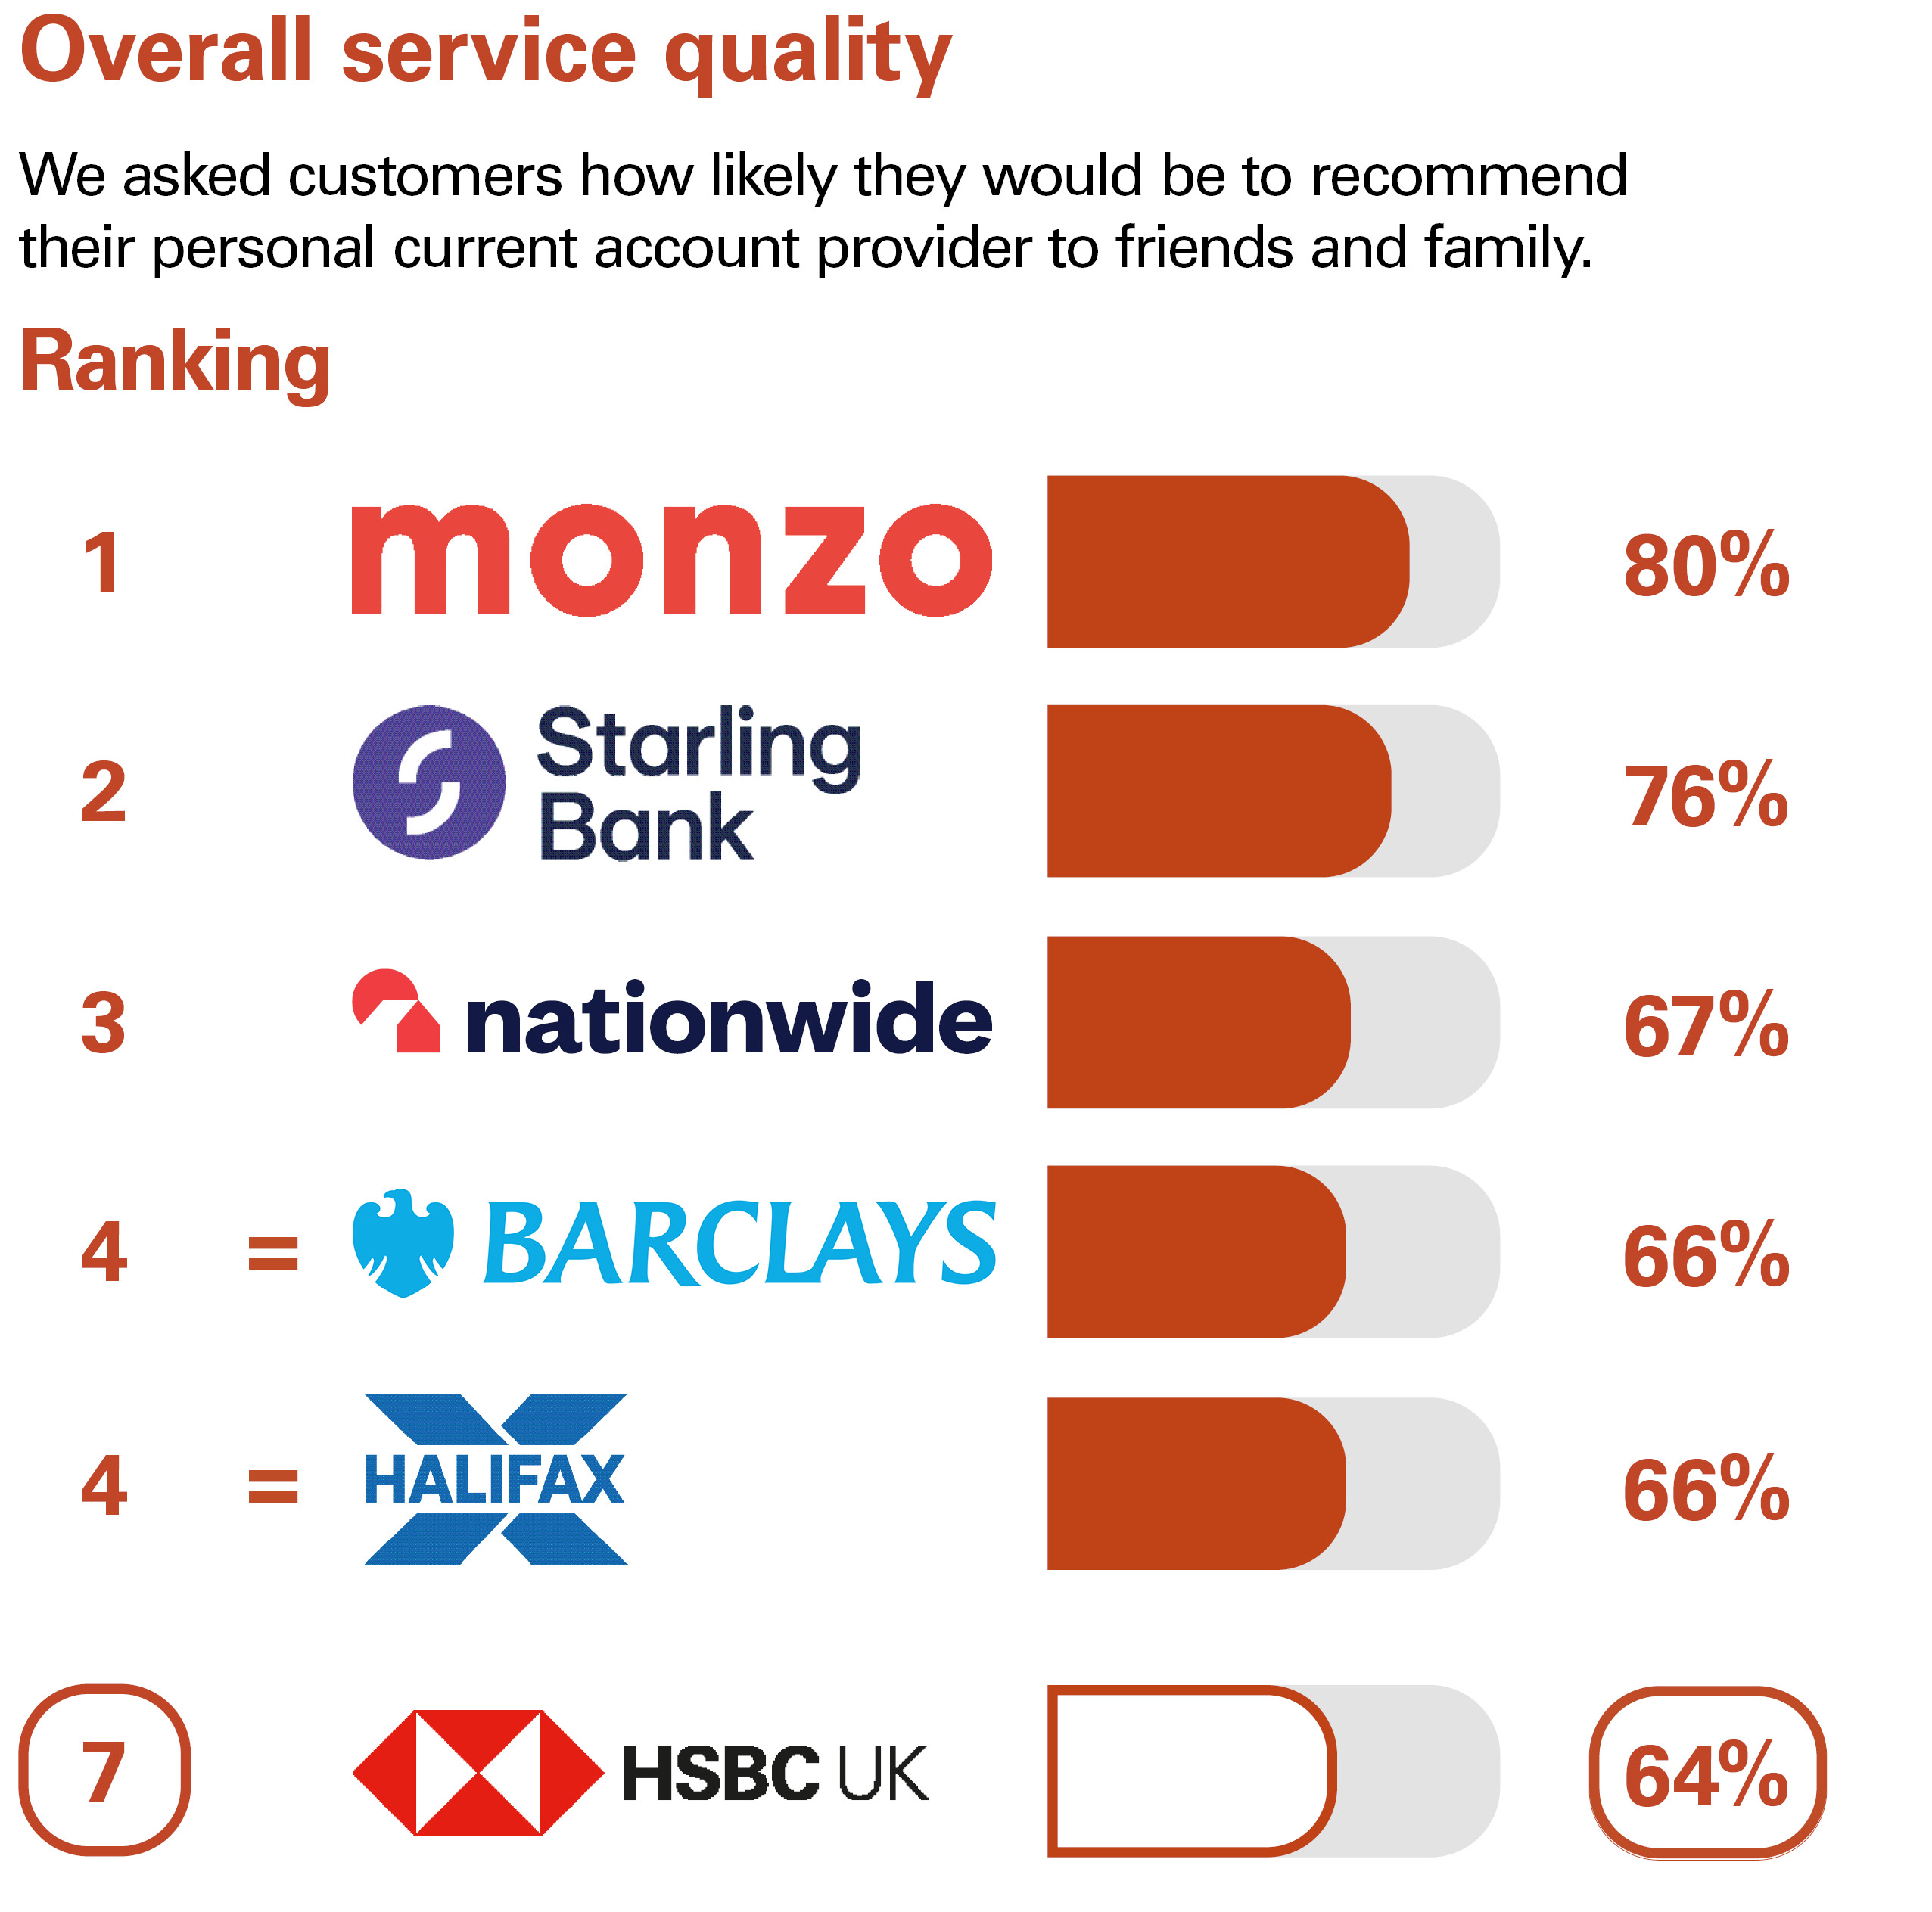 Overall Service Quality. We asked customers how likely they would be to recommend their personal current account provider to friends and family. Ranking: 1 Monzo 80% 2 Starling Bank 76% 3 Nationwide 67% equal 4 Barclays 66% equal 4 Halifax 66% 7 HSBC UK 64%